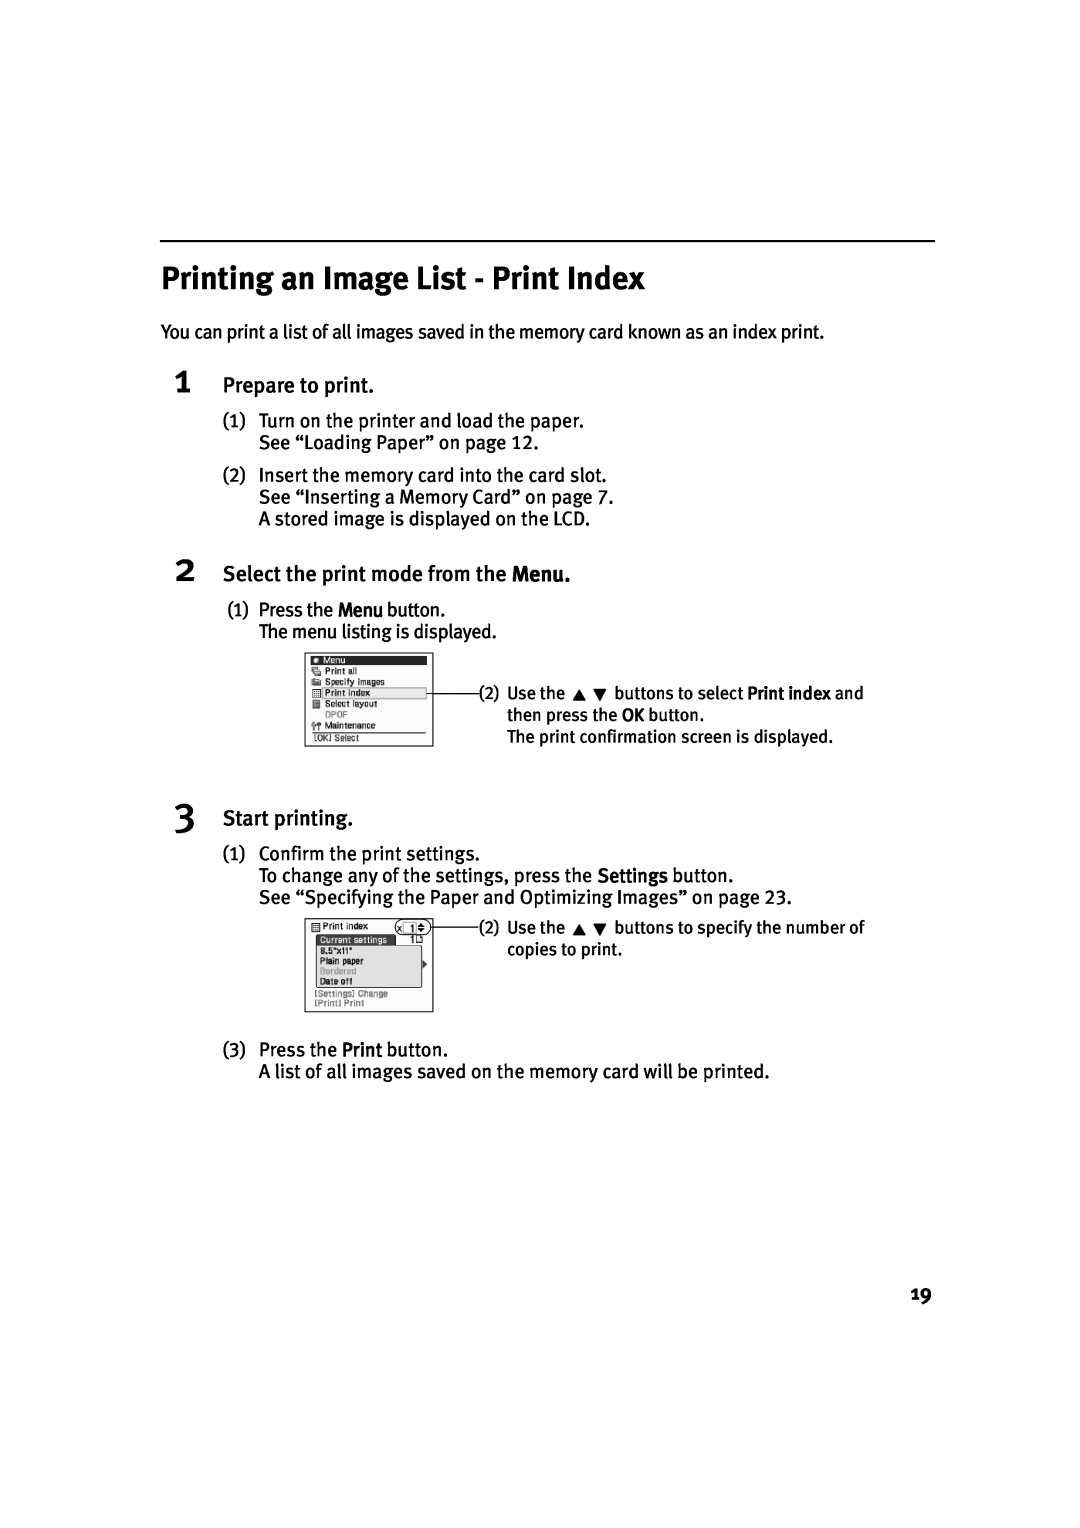 Canon 900D Printing an Image List - Print Index, Prepare to print, Select the print mode from the Menu, Start printing 